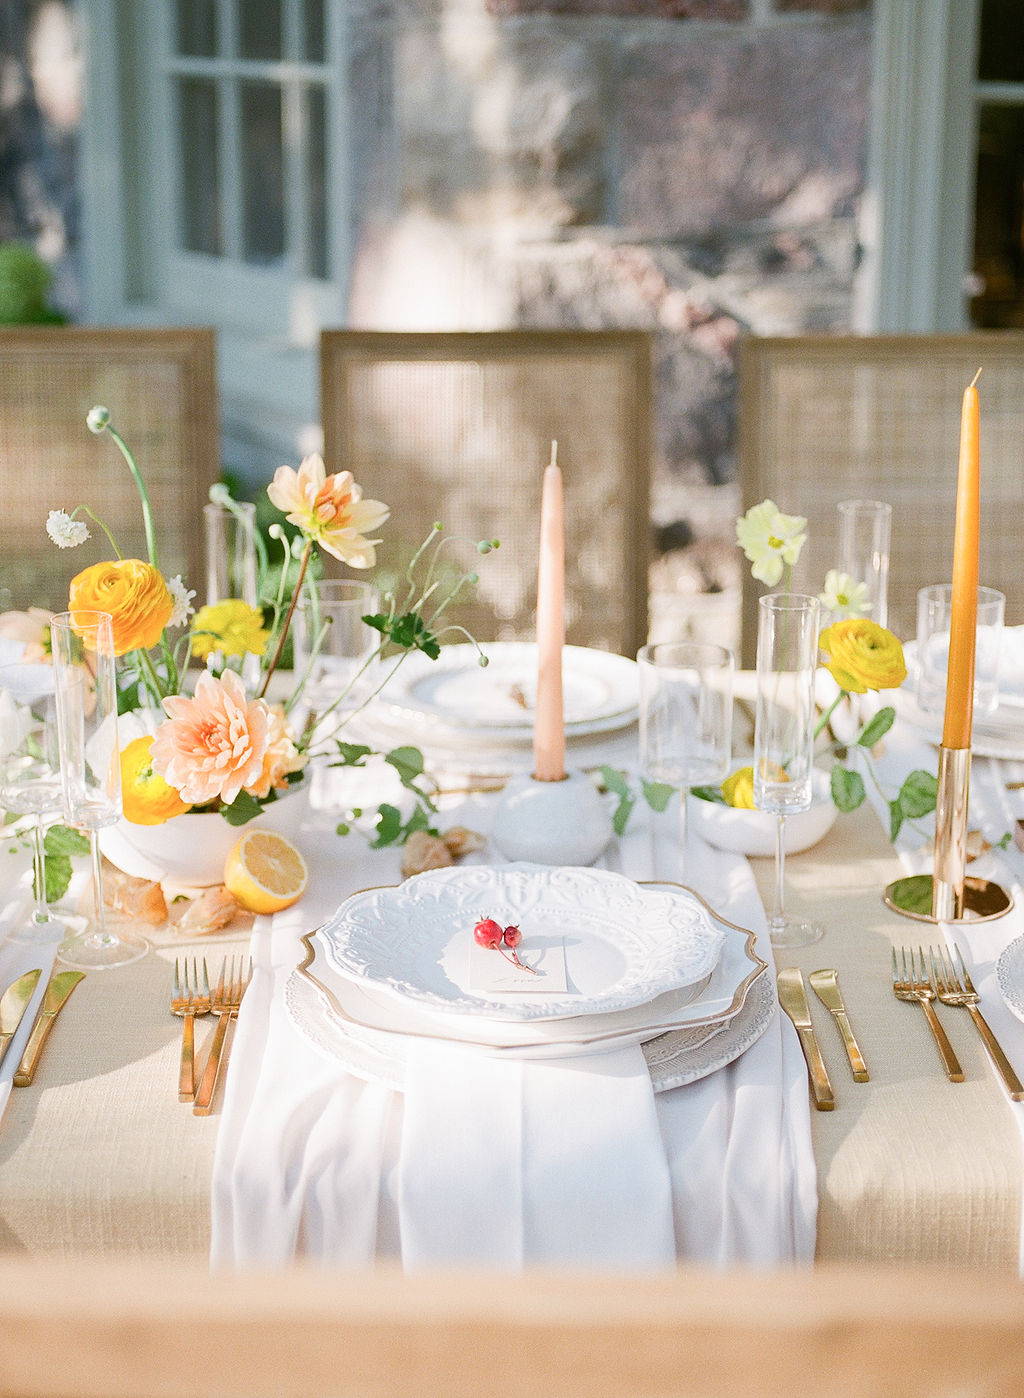 wedding table scape with white plate with two cherries, small orange and peach floral arrangement,  glassware, and orange and peach candles